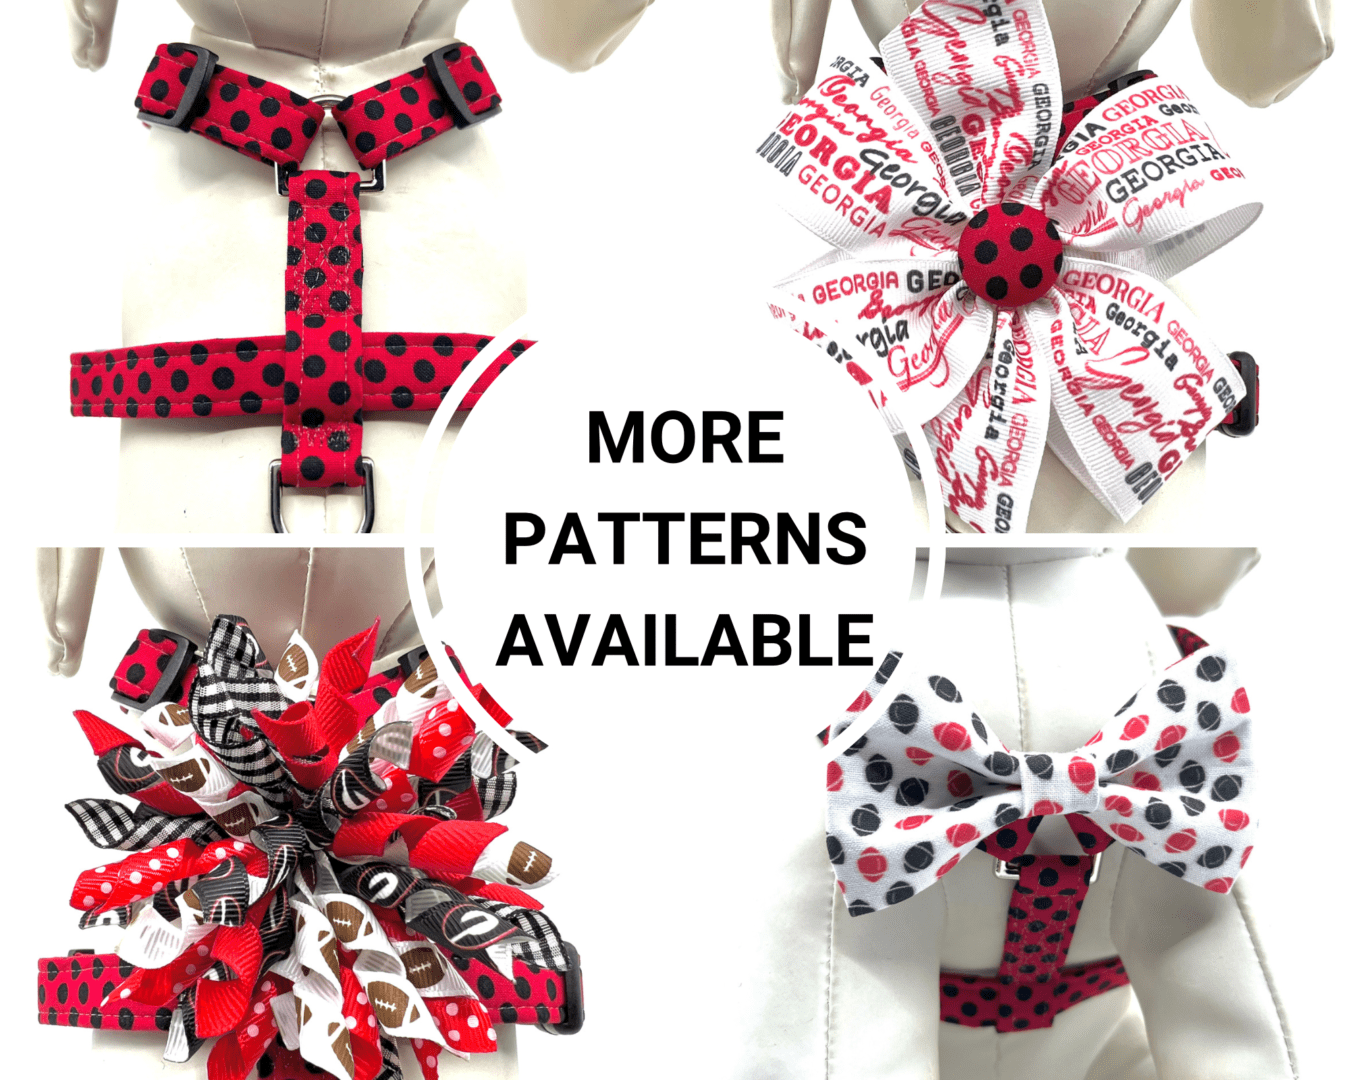 A variety of patterns for dog collars and harnesses.